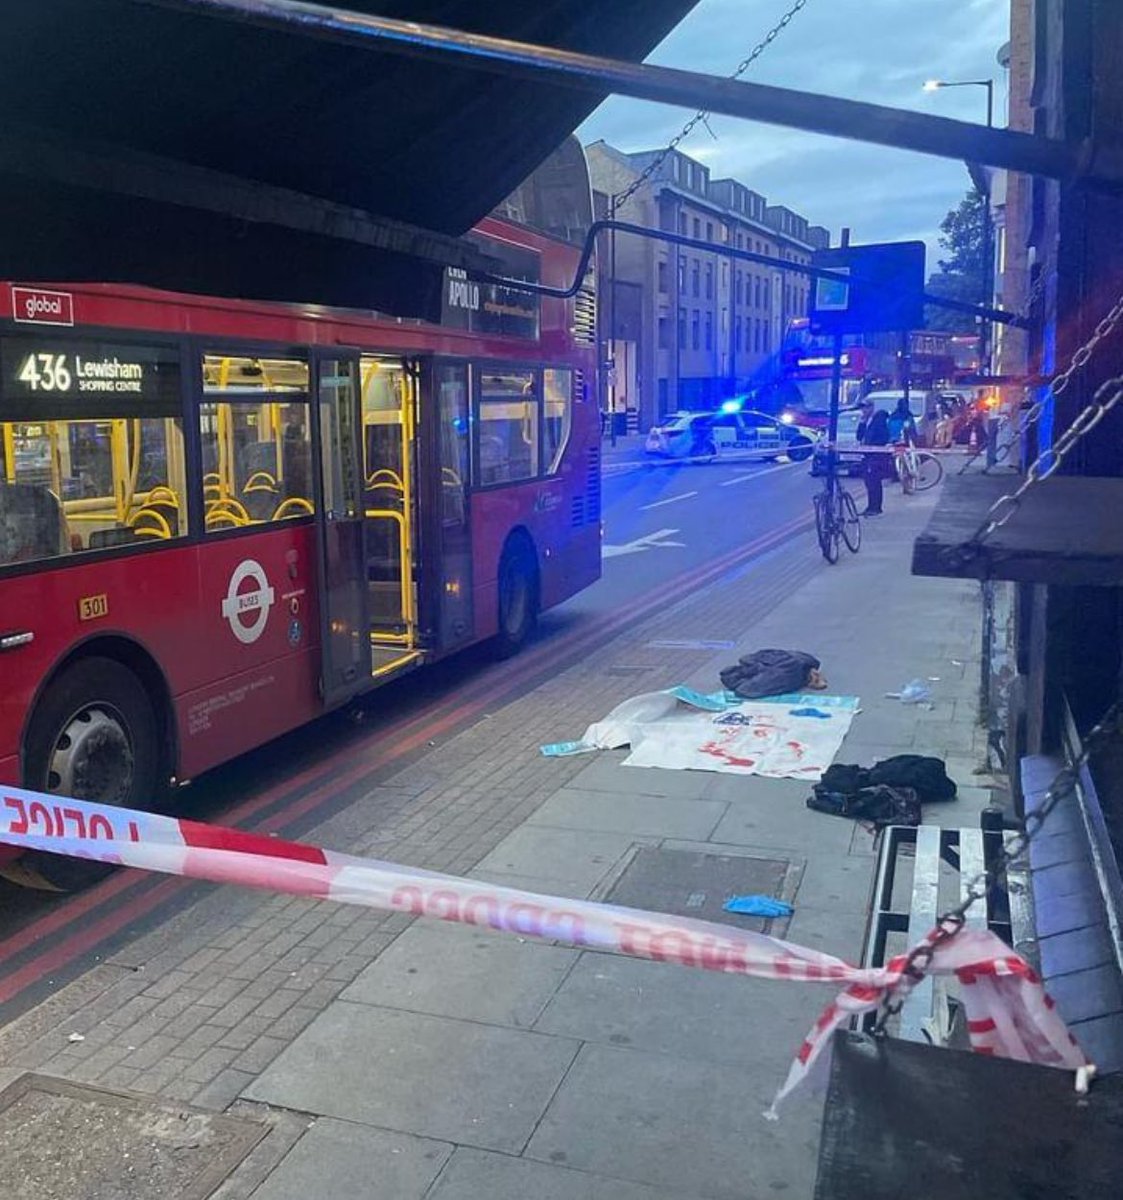 A British man was stabbed in London today. It was claimed that the attacker was North African. Crime rate increased by 2500% during Sadiq Khan's term.